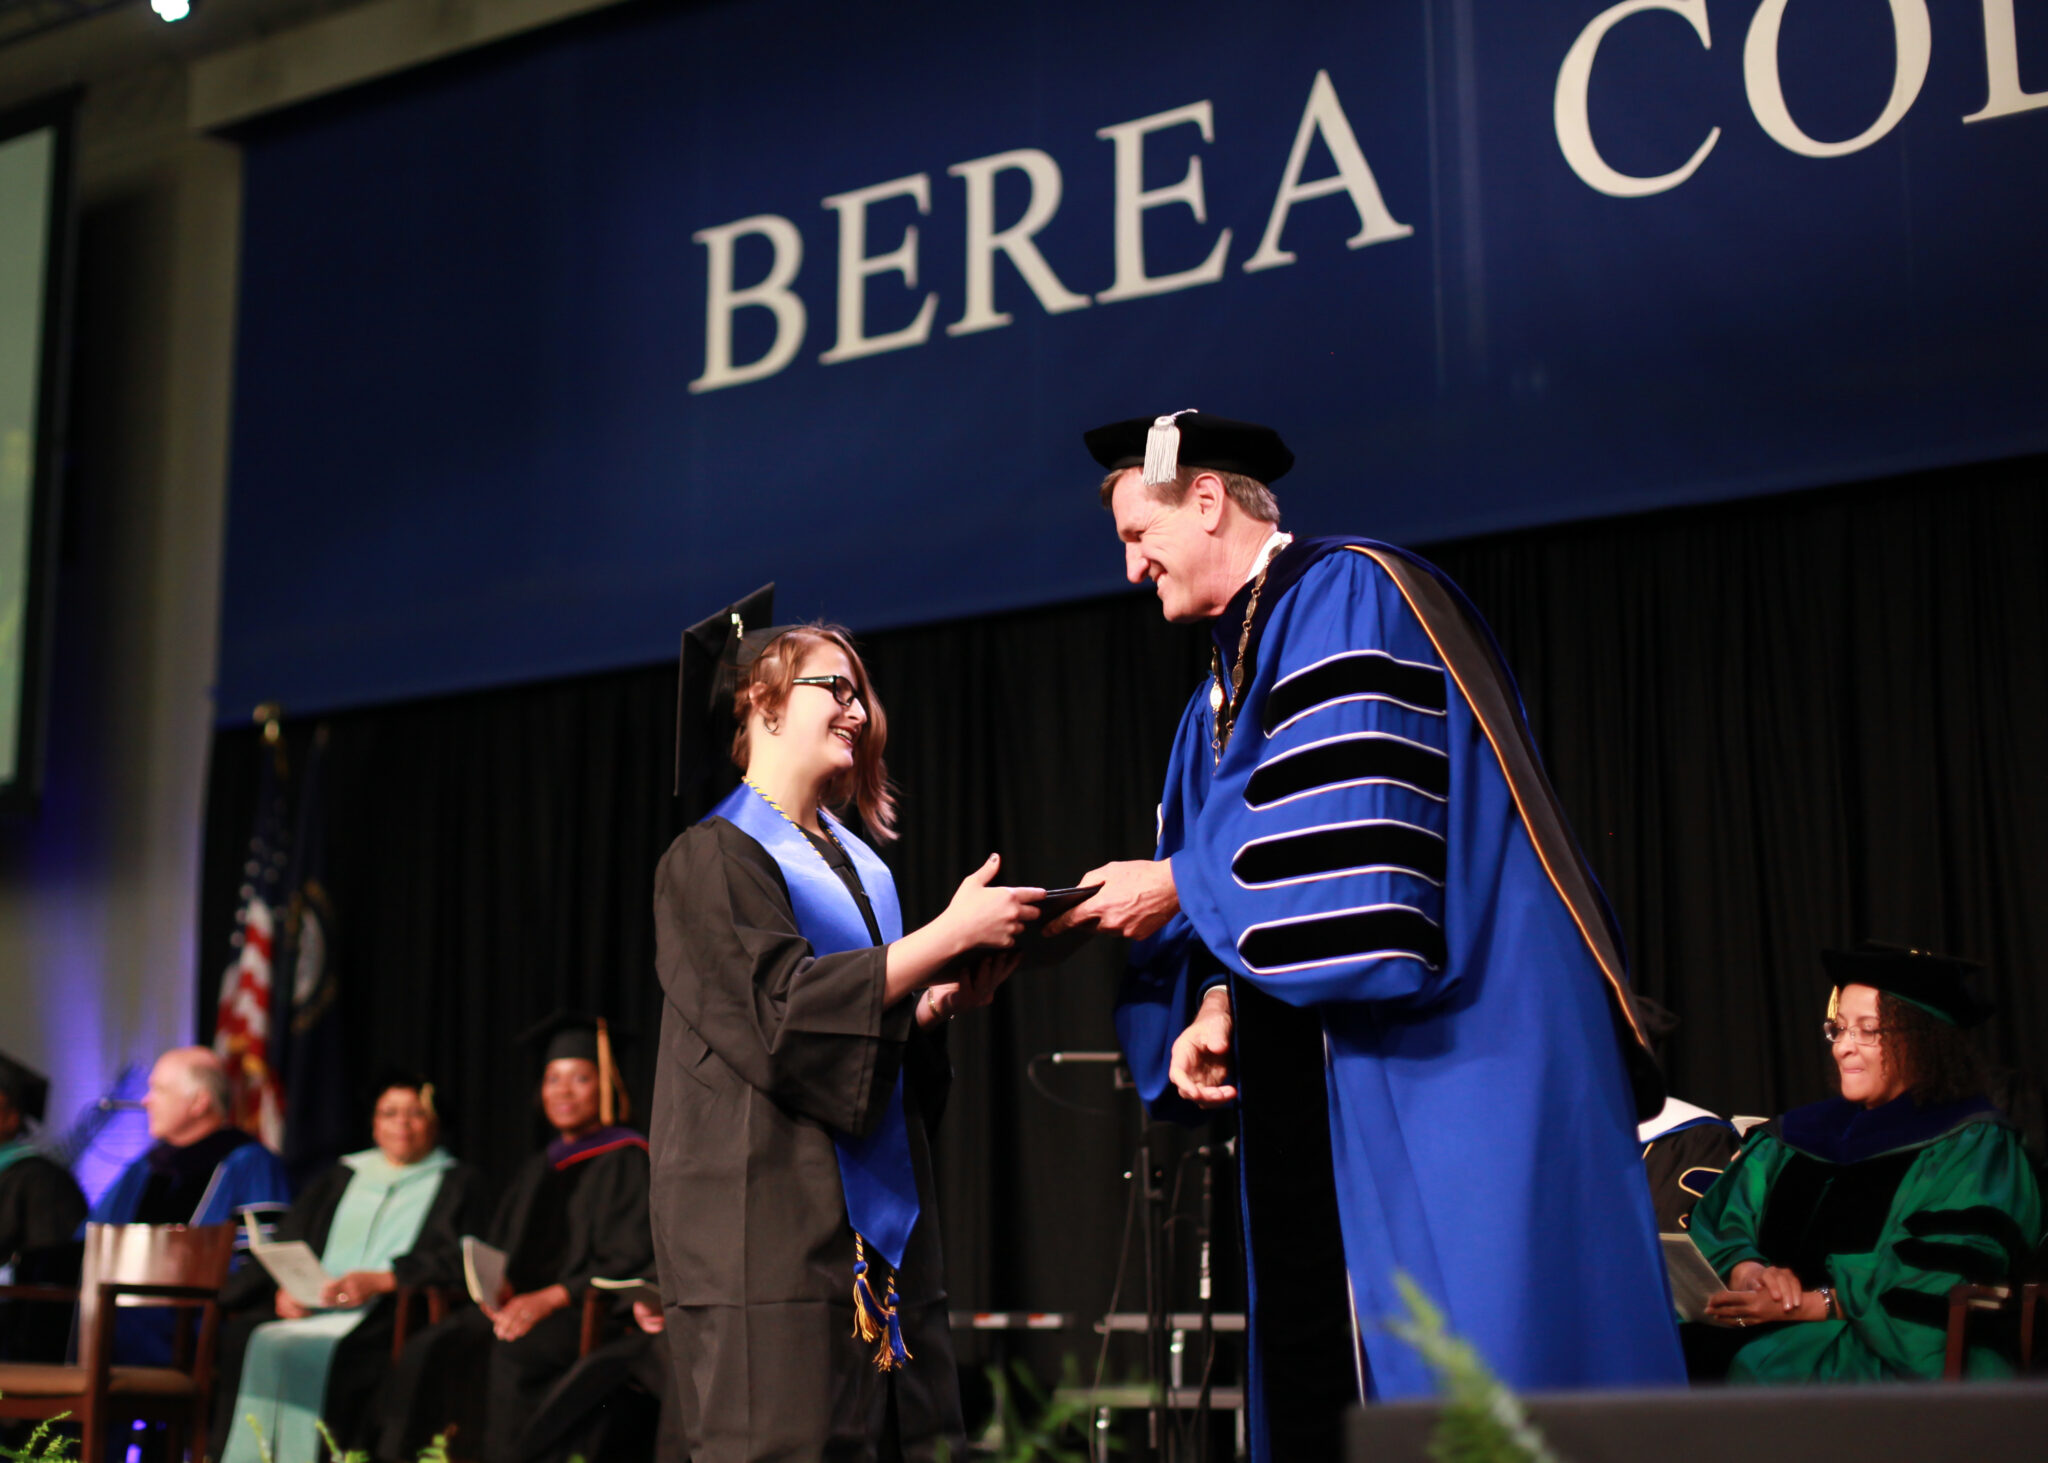 Photo of Berea College student shaking hands with President Roelofs on the graduation stage.